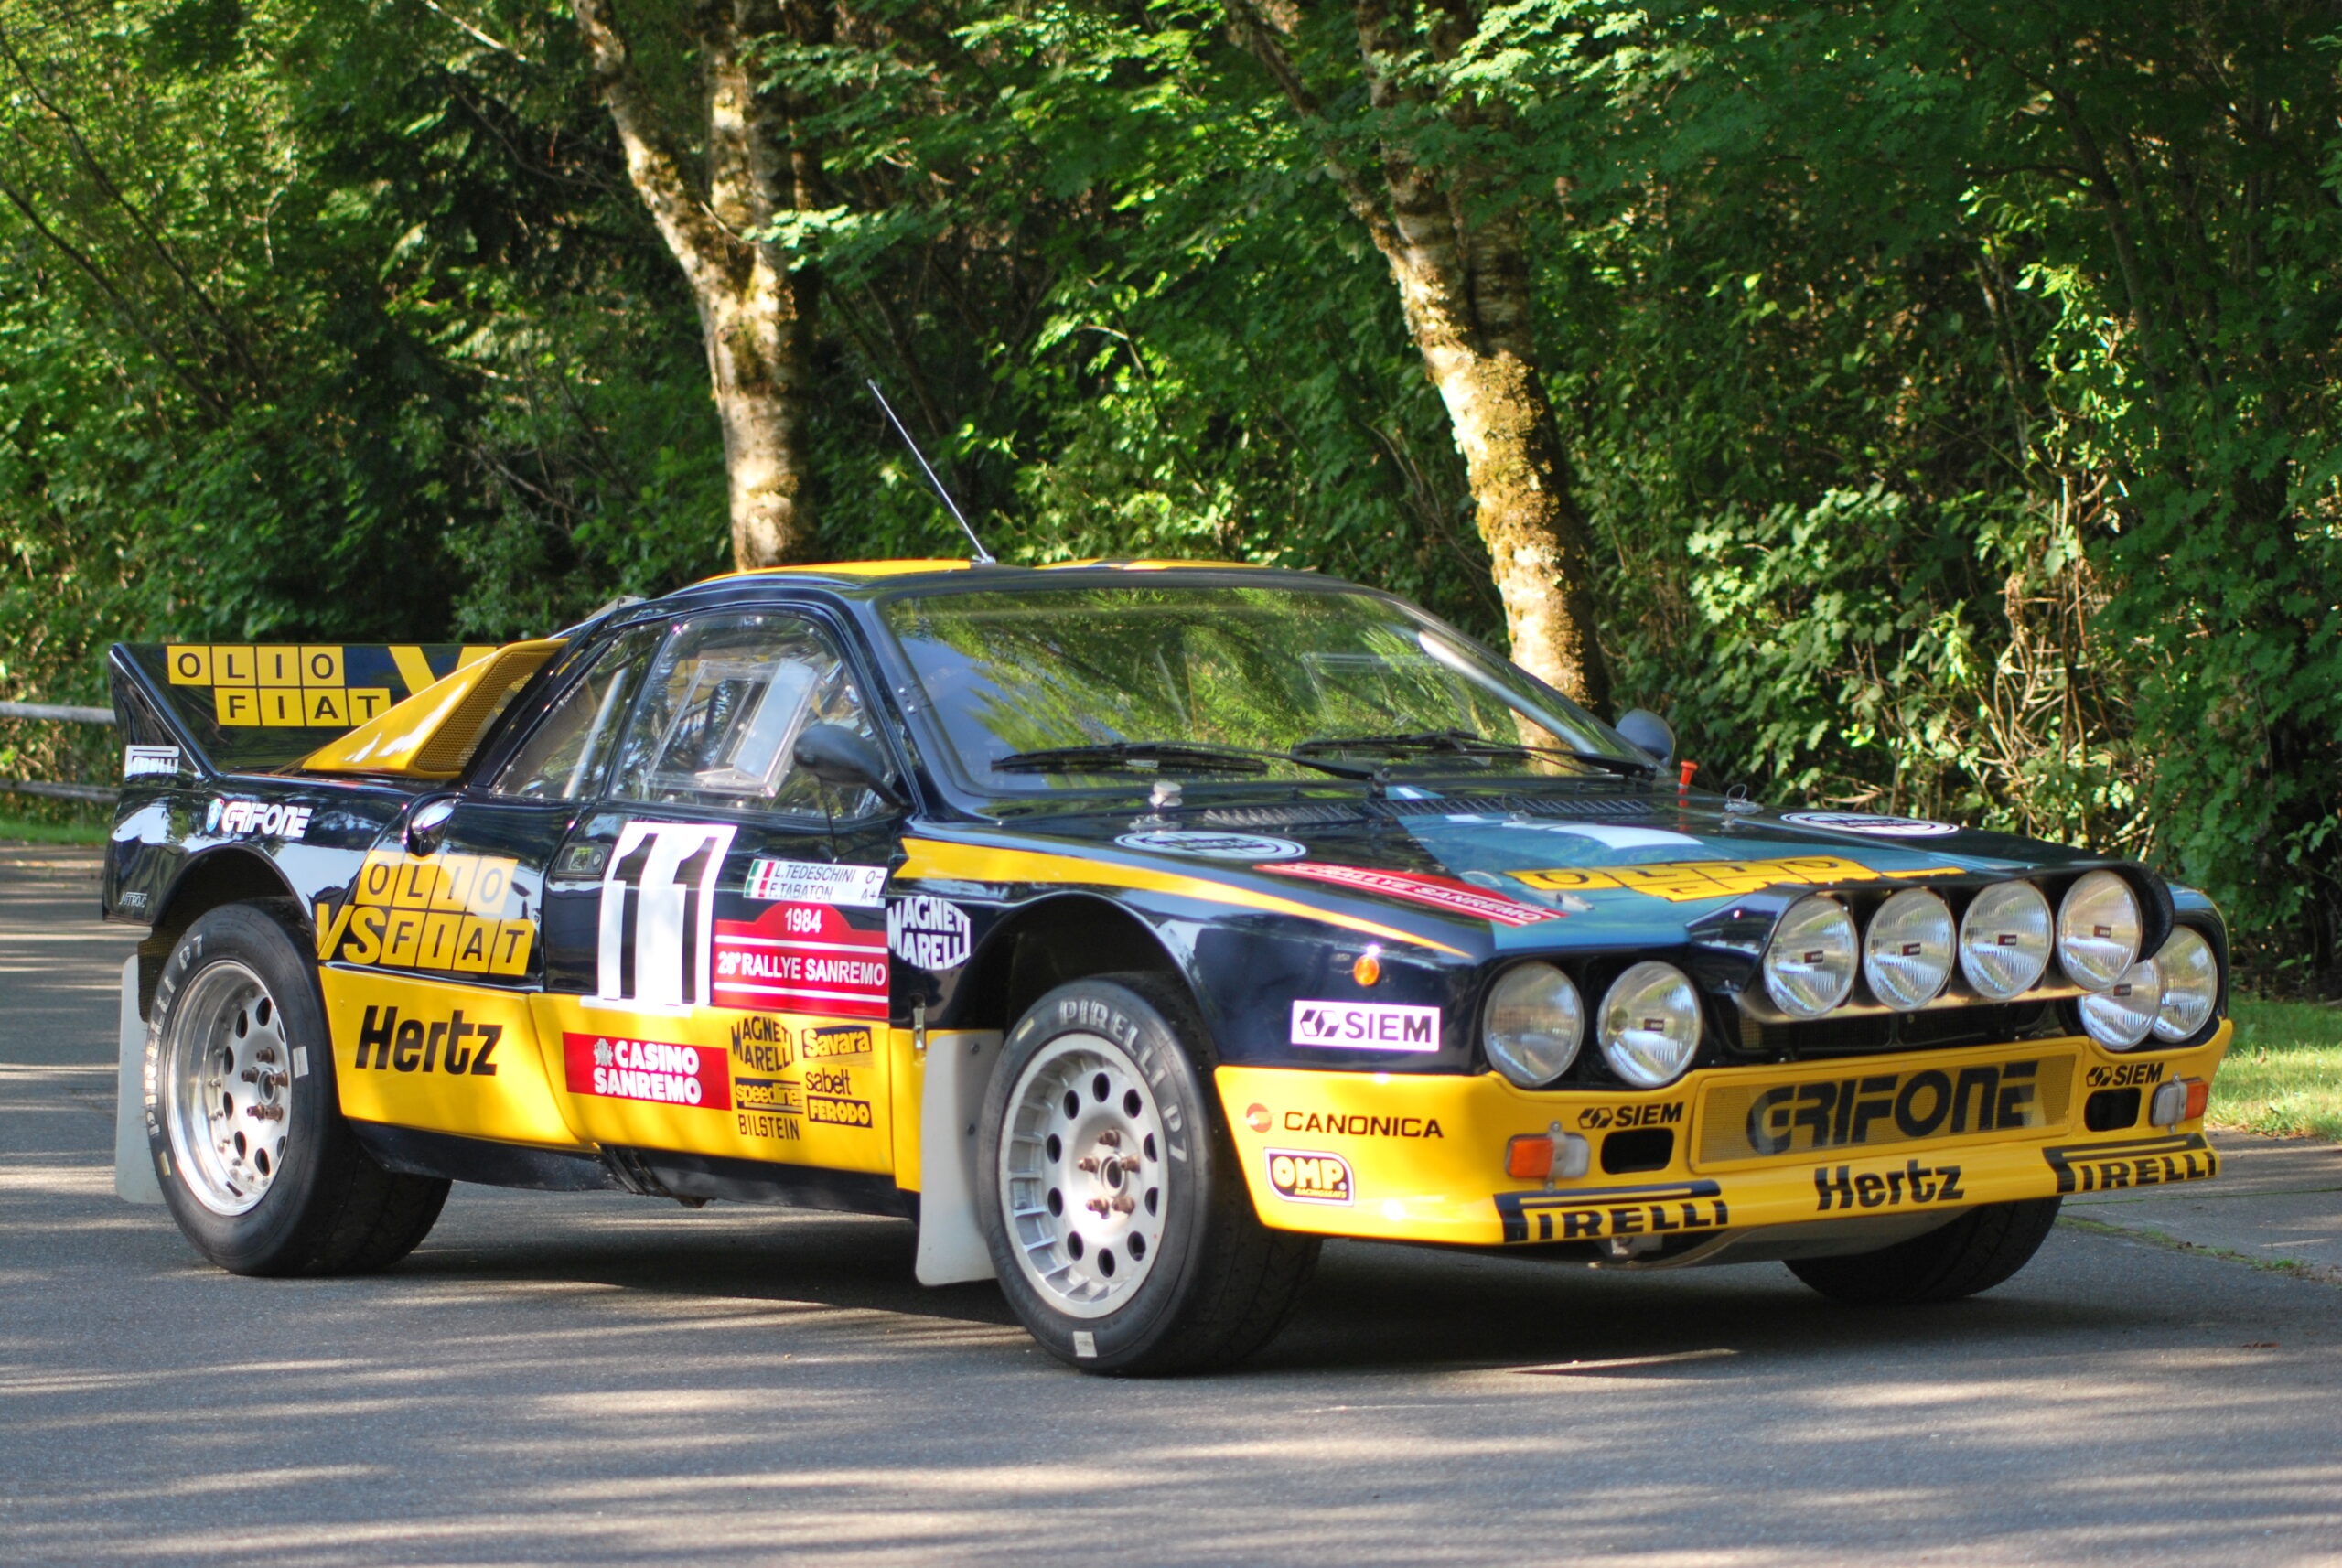 Classic F1, Rally Cars to Appear at Velocity Invitational | THE SHOP